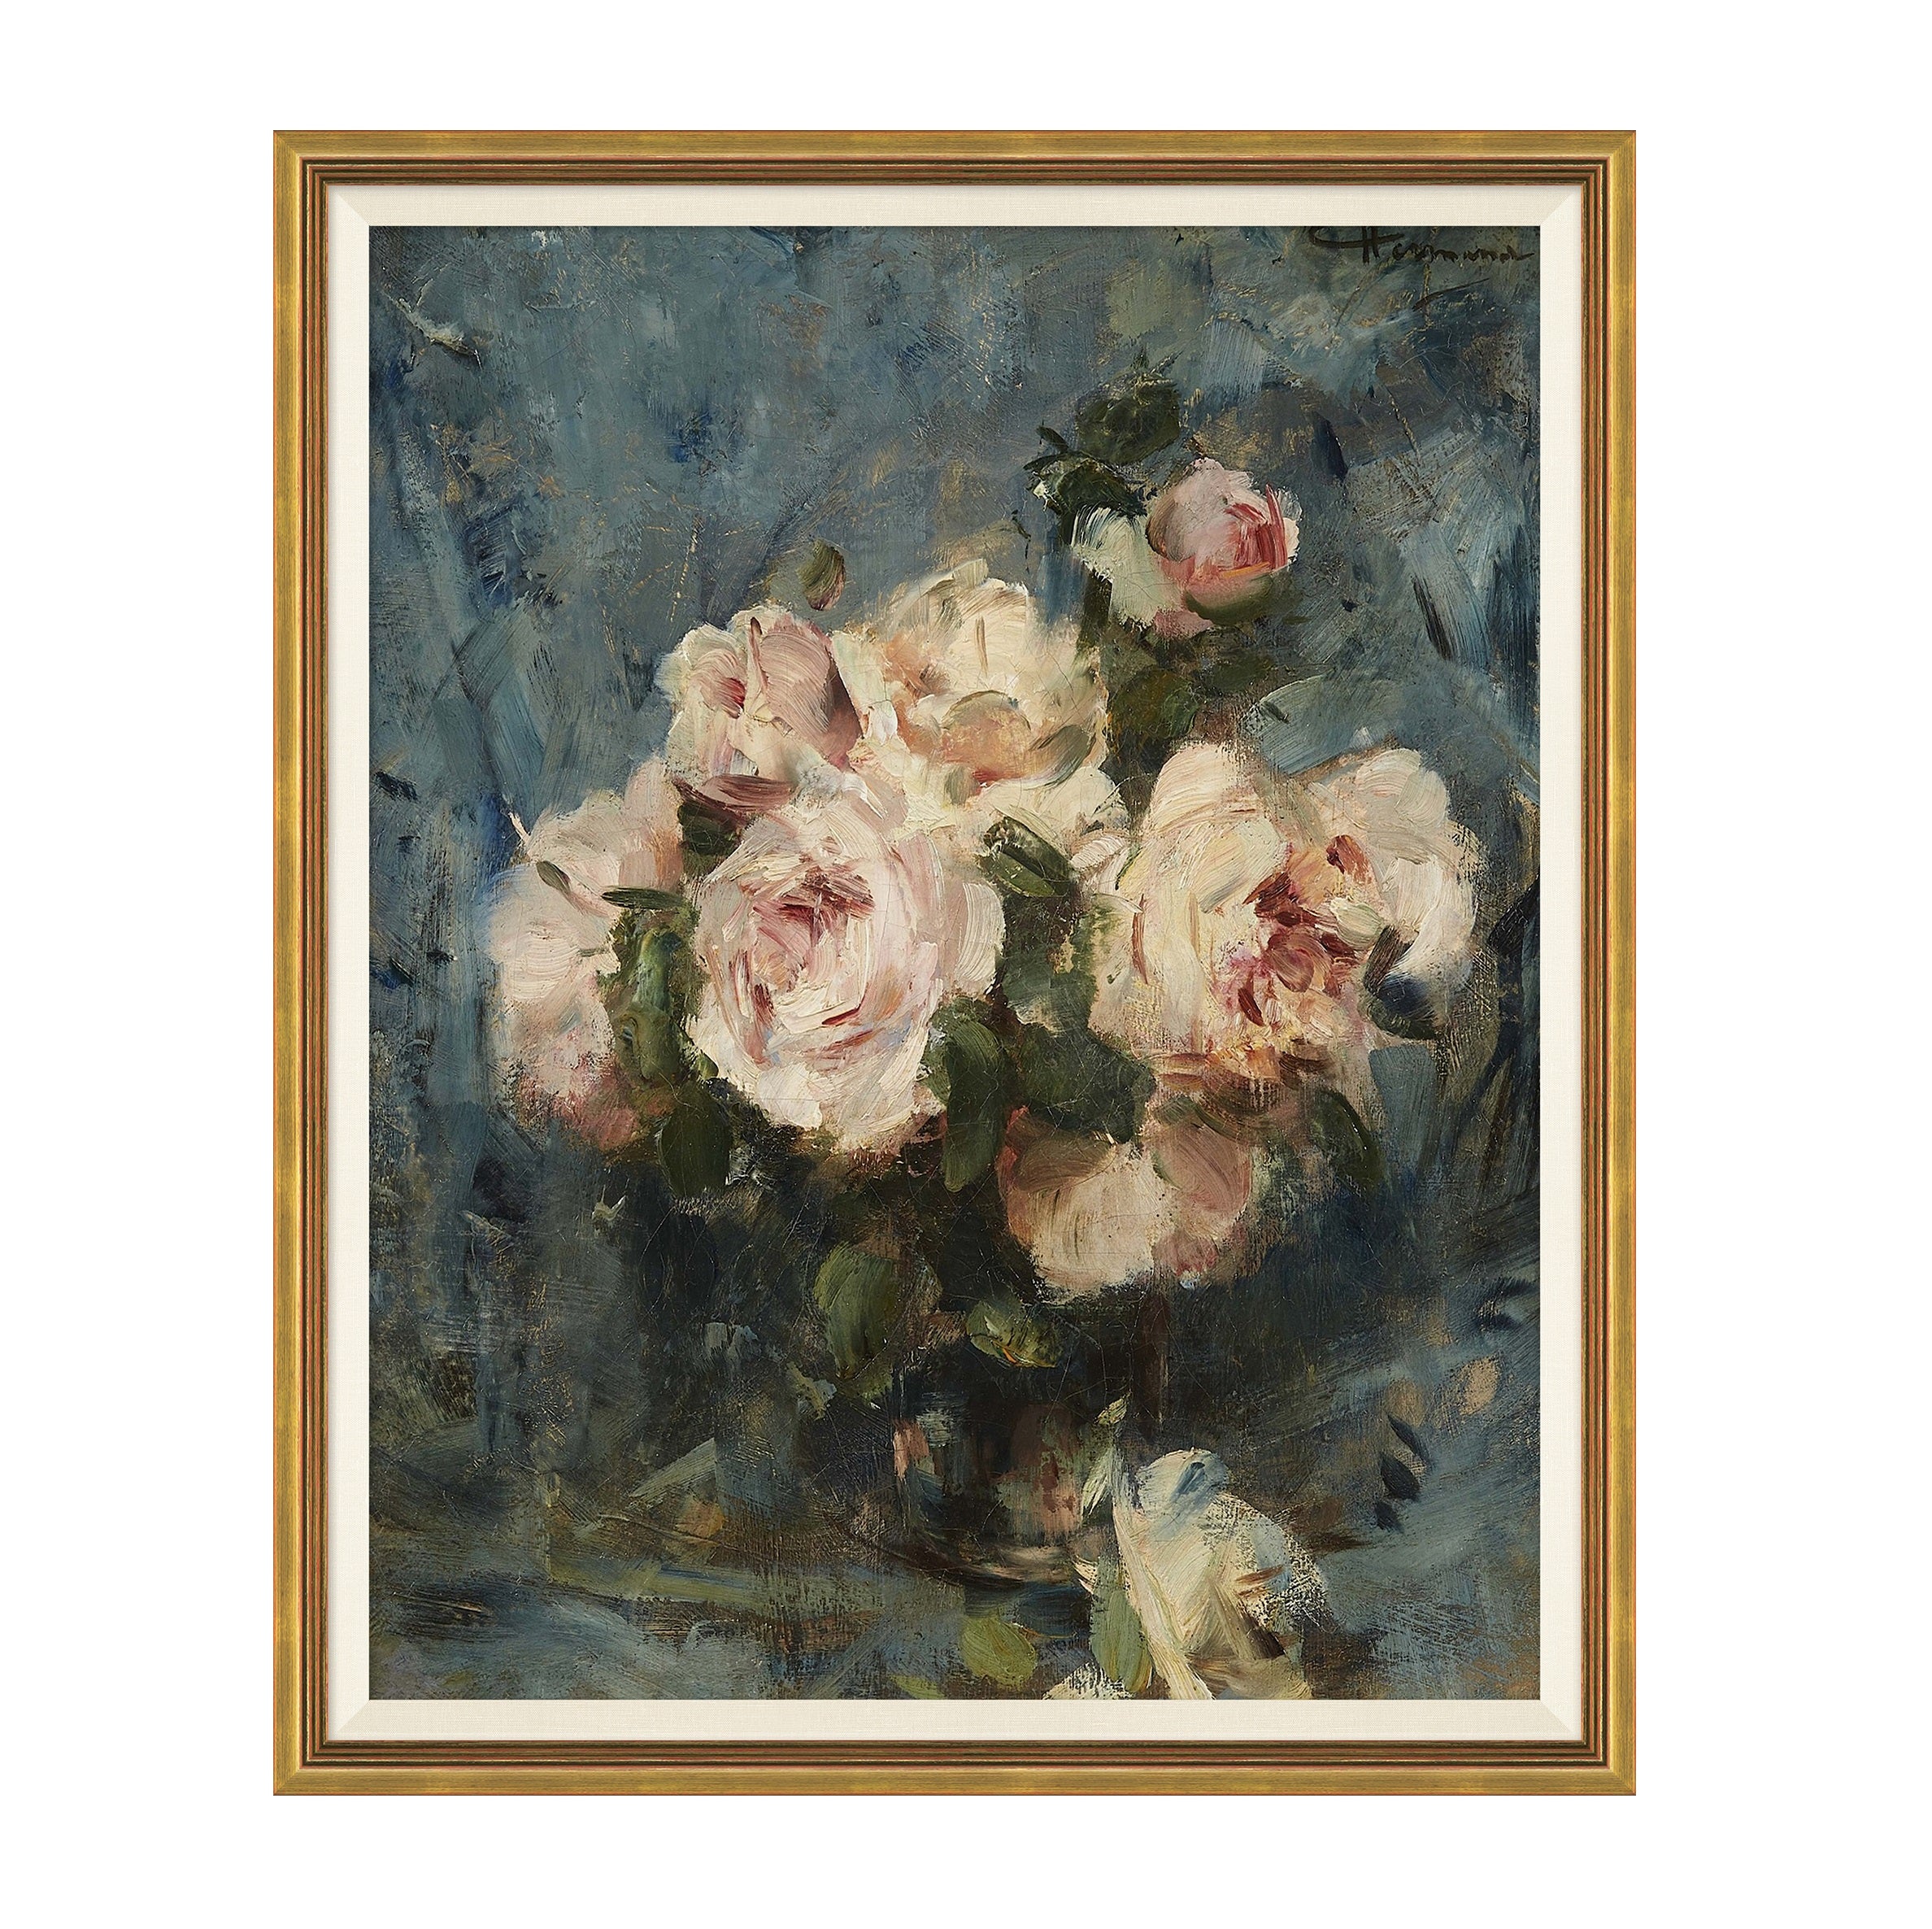 Framed wall art called Still Life with Roses in a Glass Vase On sale for $416.00, discounted from $520.00